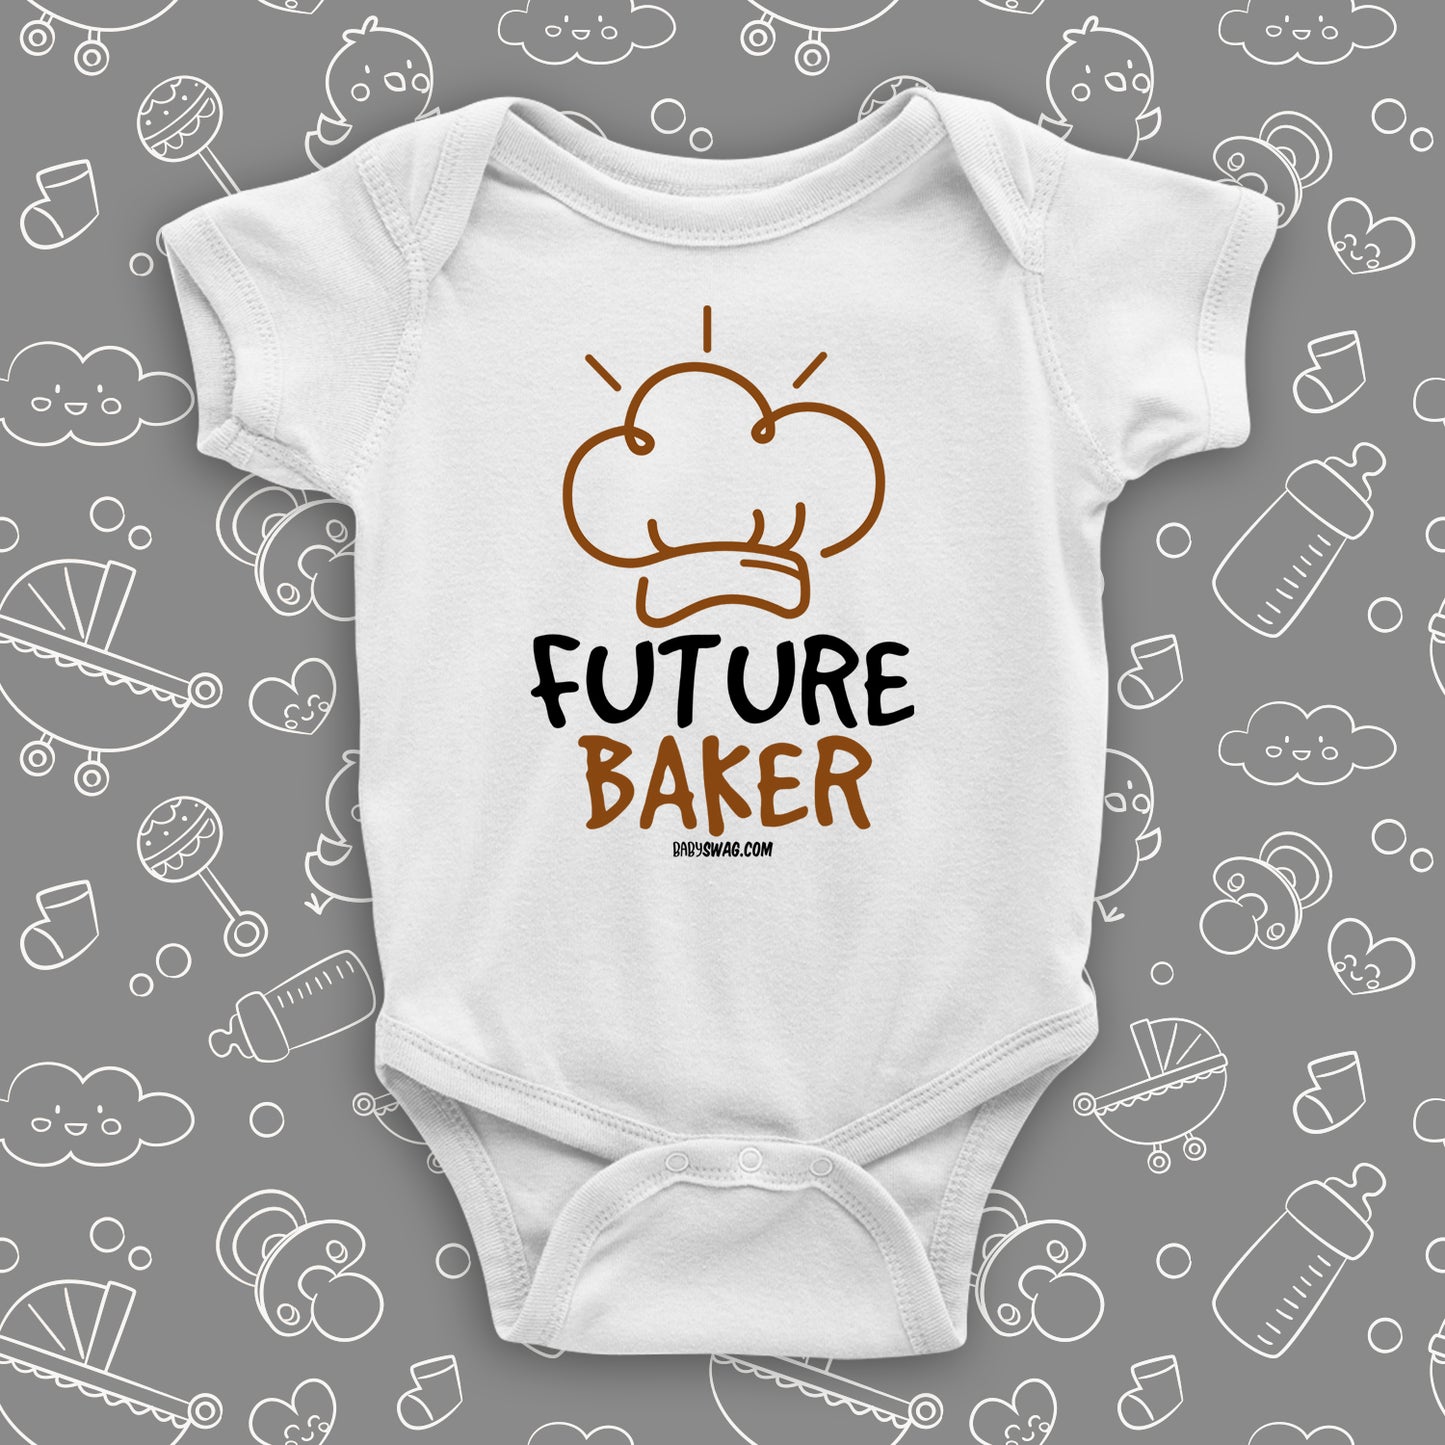 Cool baby onesie with "Future chef" print in white.